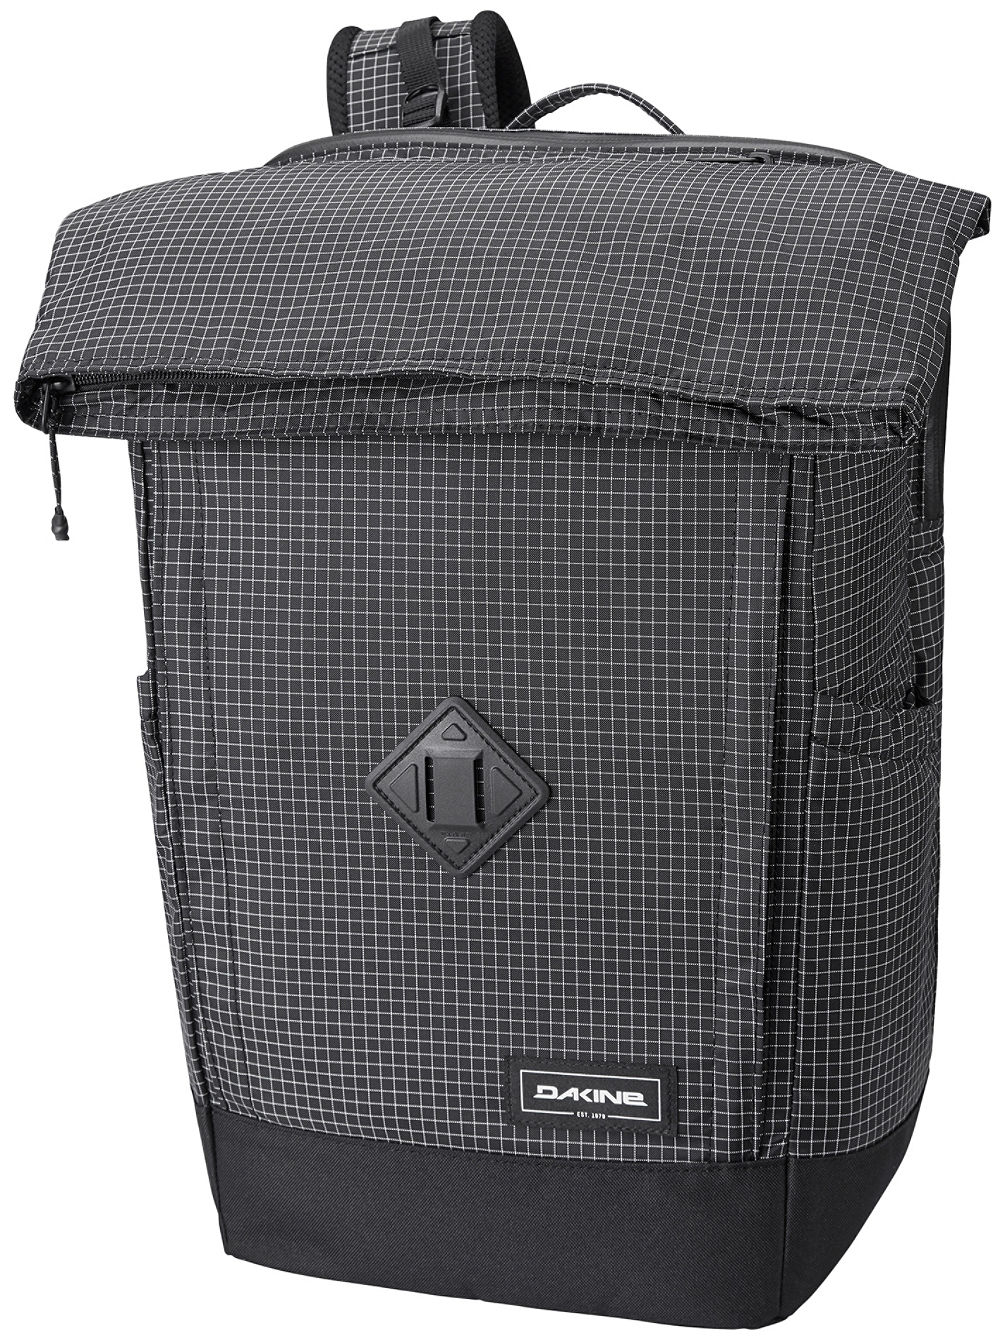 Infinity 21L Backpack